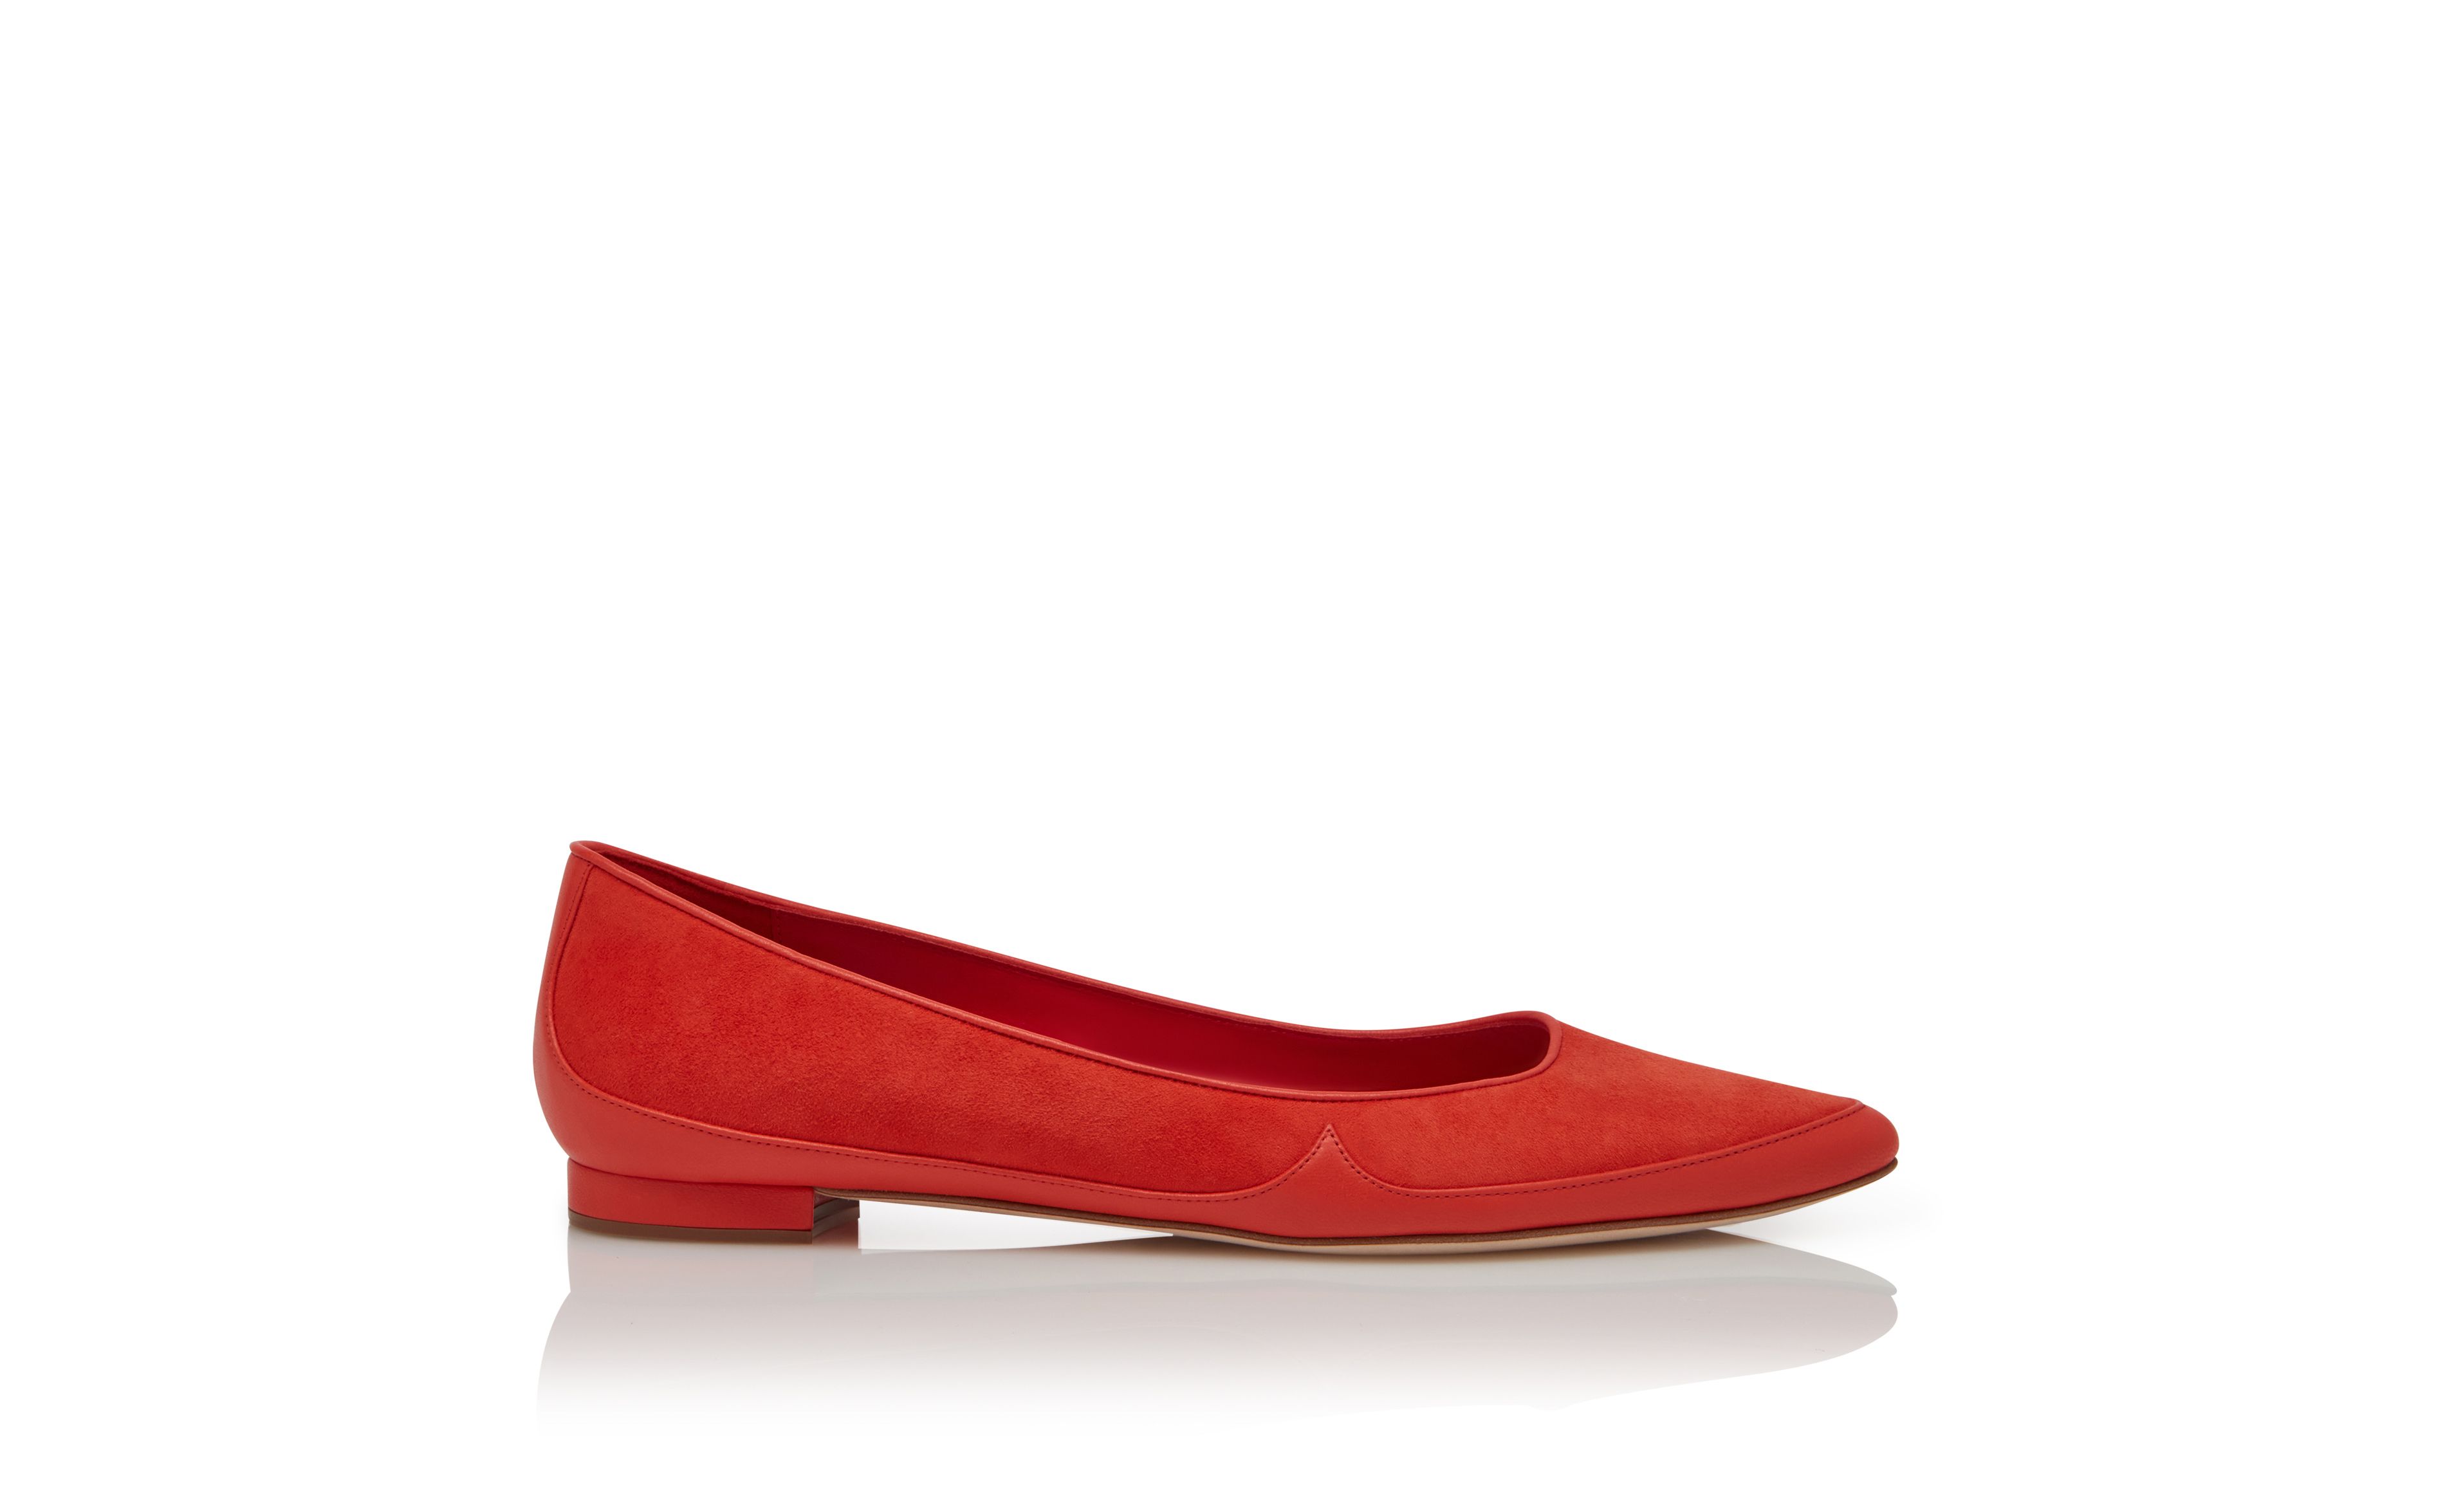 Designer Orange Nappa Leather and Suede Flat Pumps  - Image Side View